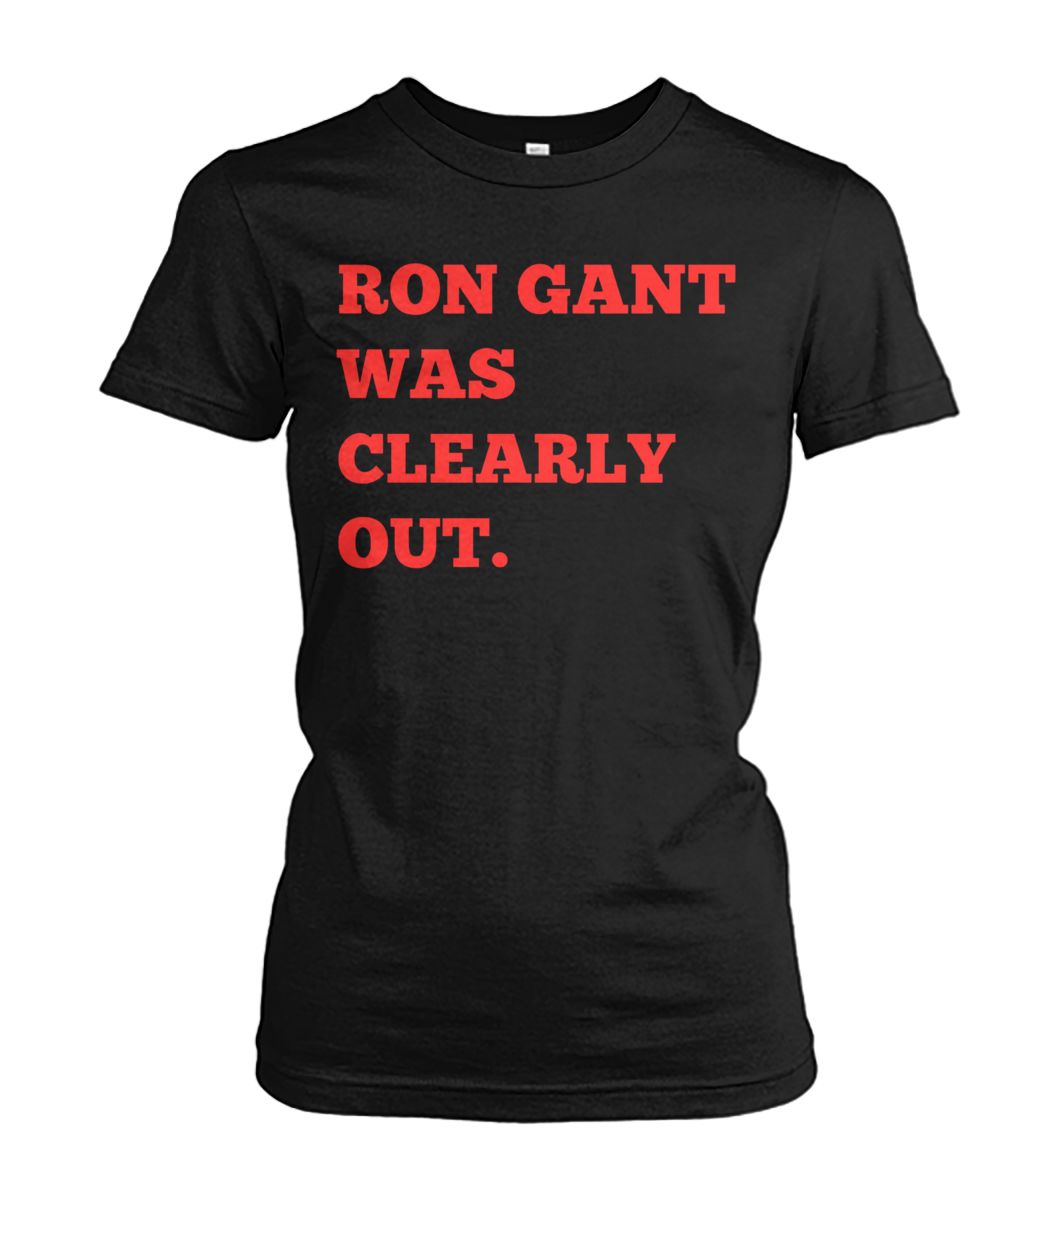 Ron gant was clearly out women's crew tee